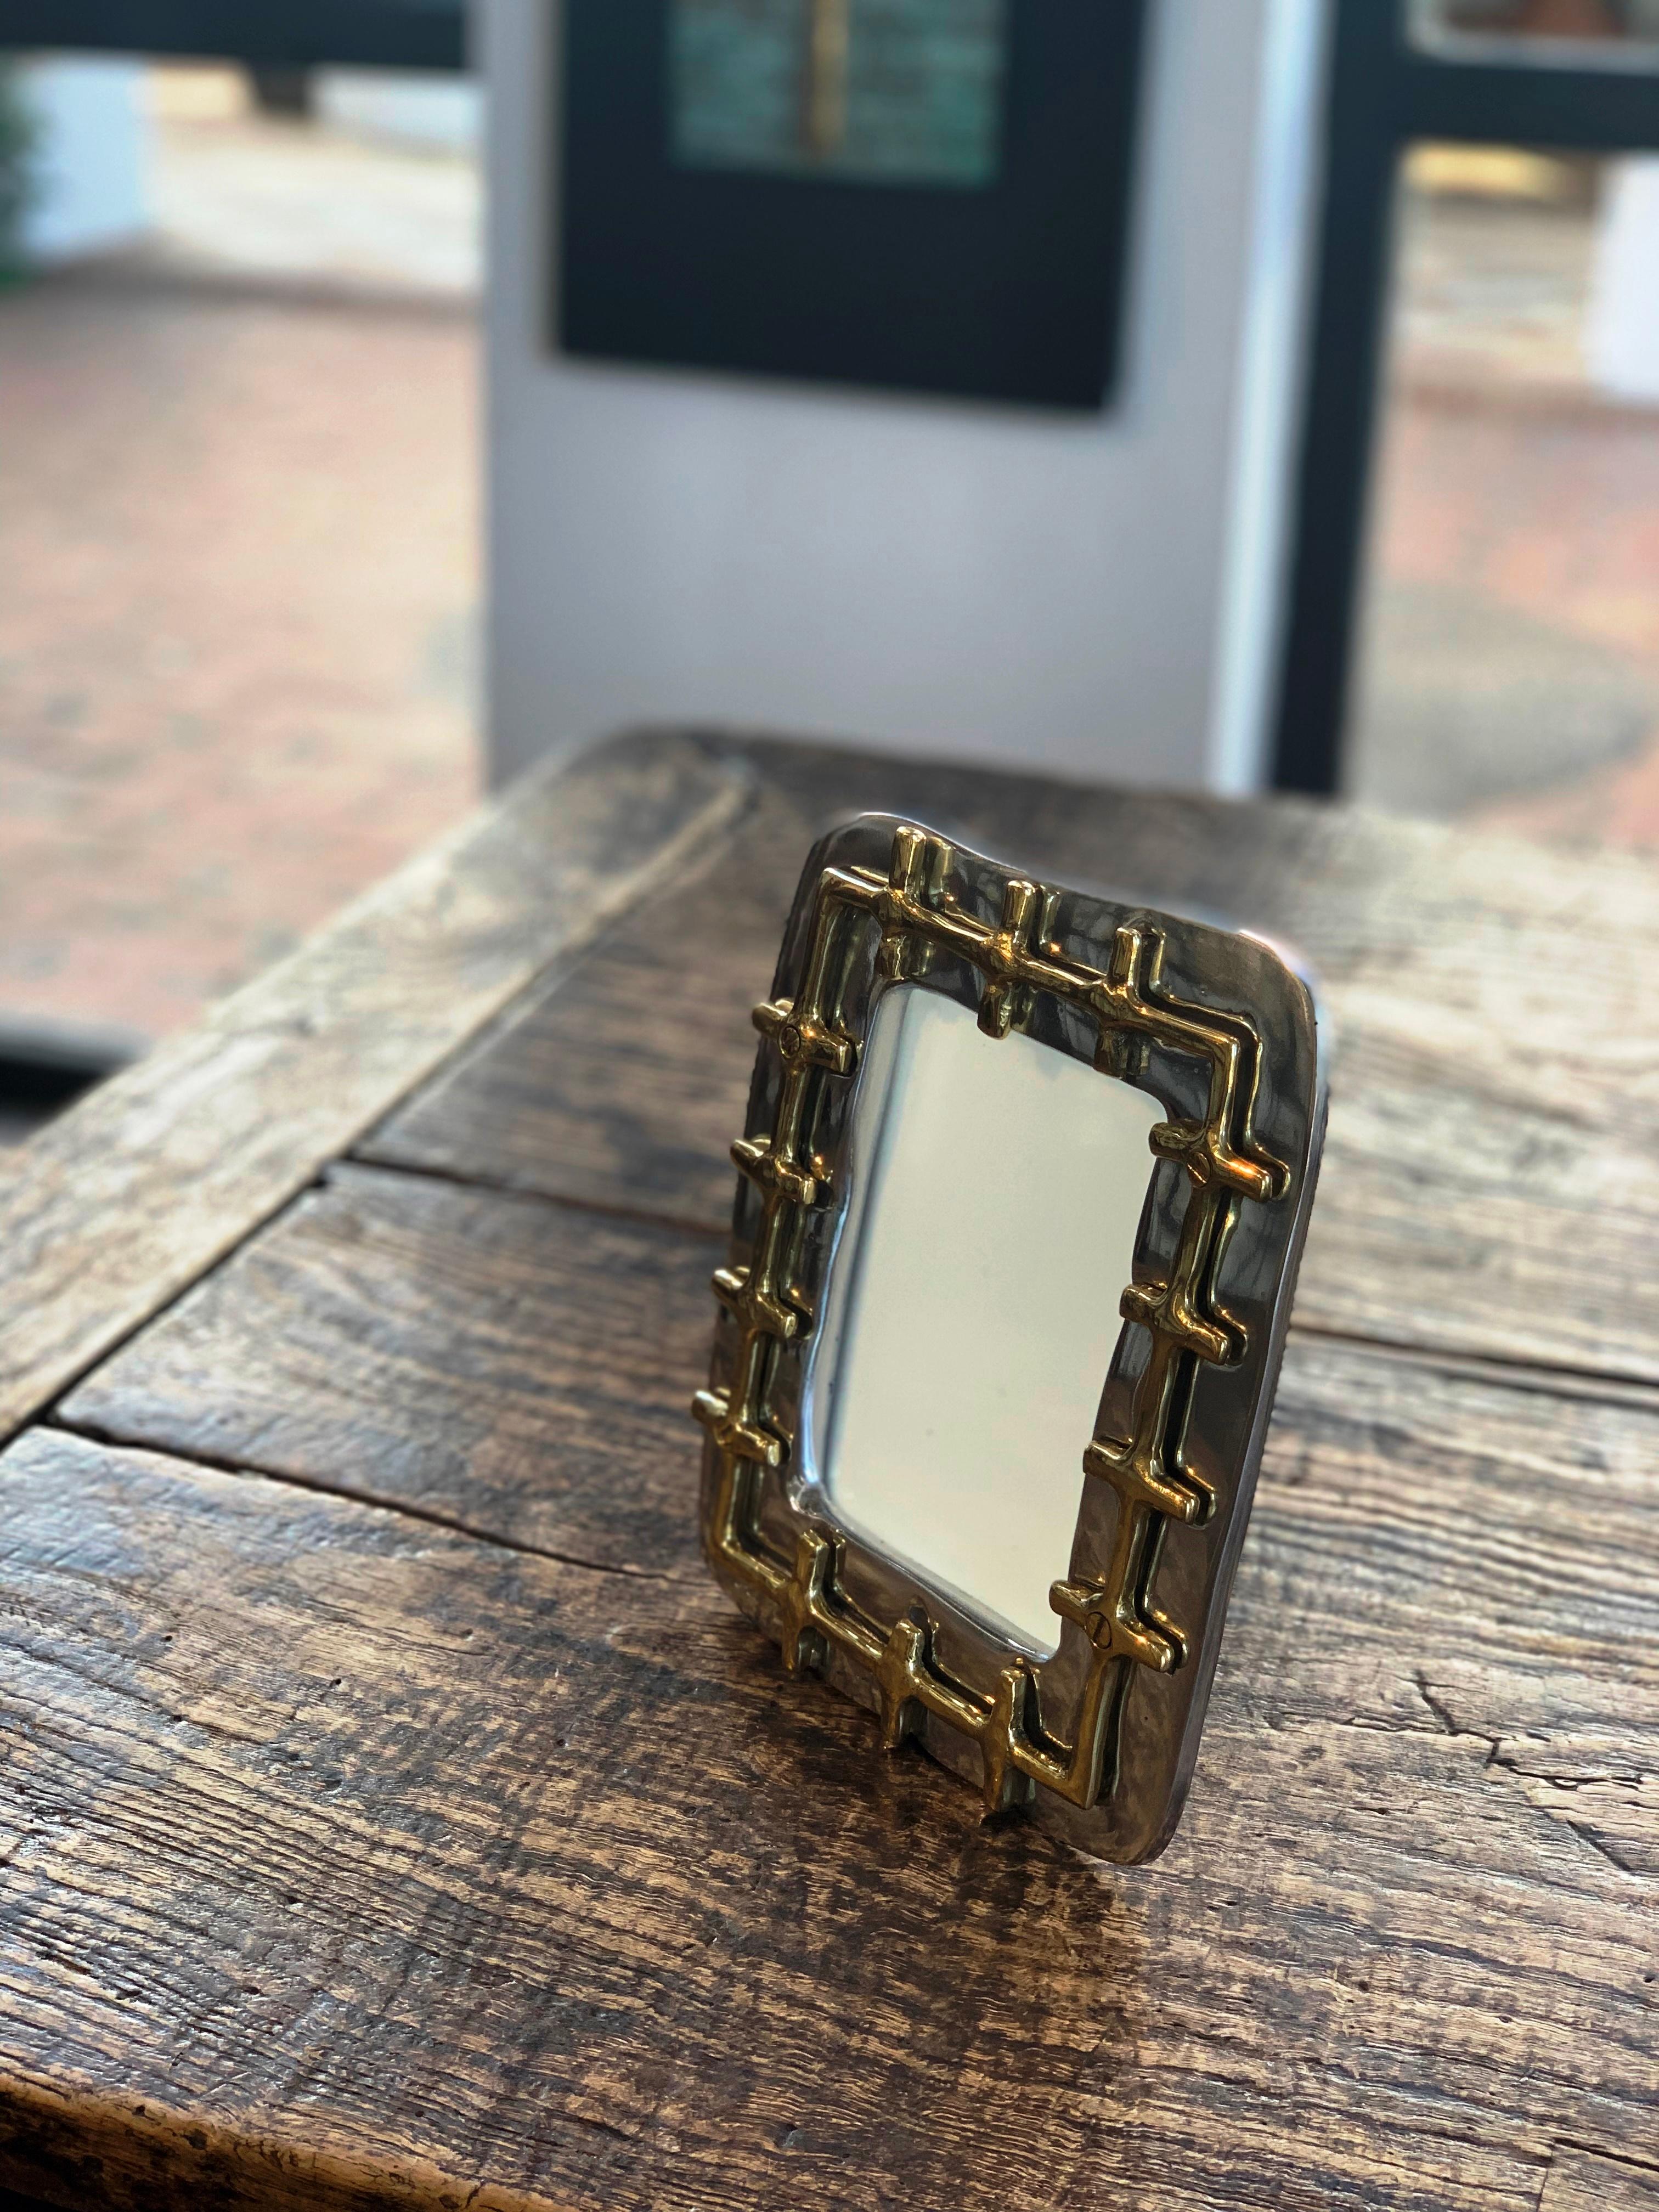 The decorative Picture frame , was created by David Marshall, it is made of  sand cast brass. 
Handmade, mounted and finished in our foundry and workshop in Spain from recycled materials.
Certified authentic by the Artist David Marshall with his